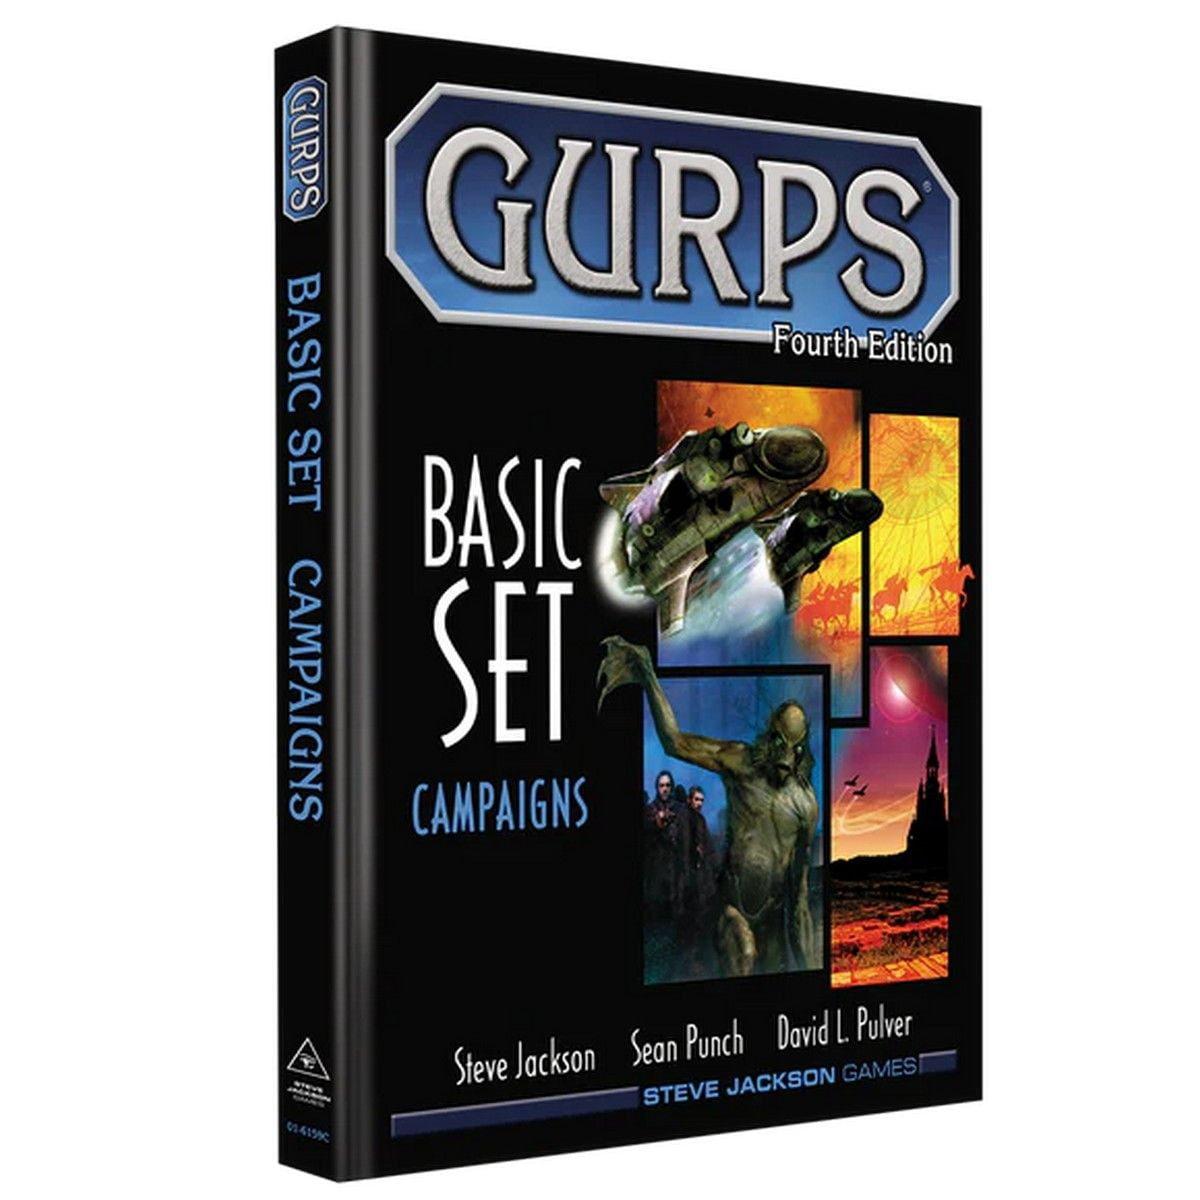 GURPS: Basic Set - Campaigns 4th Edition